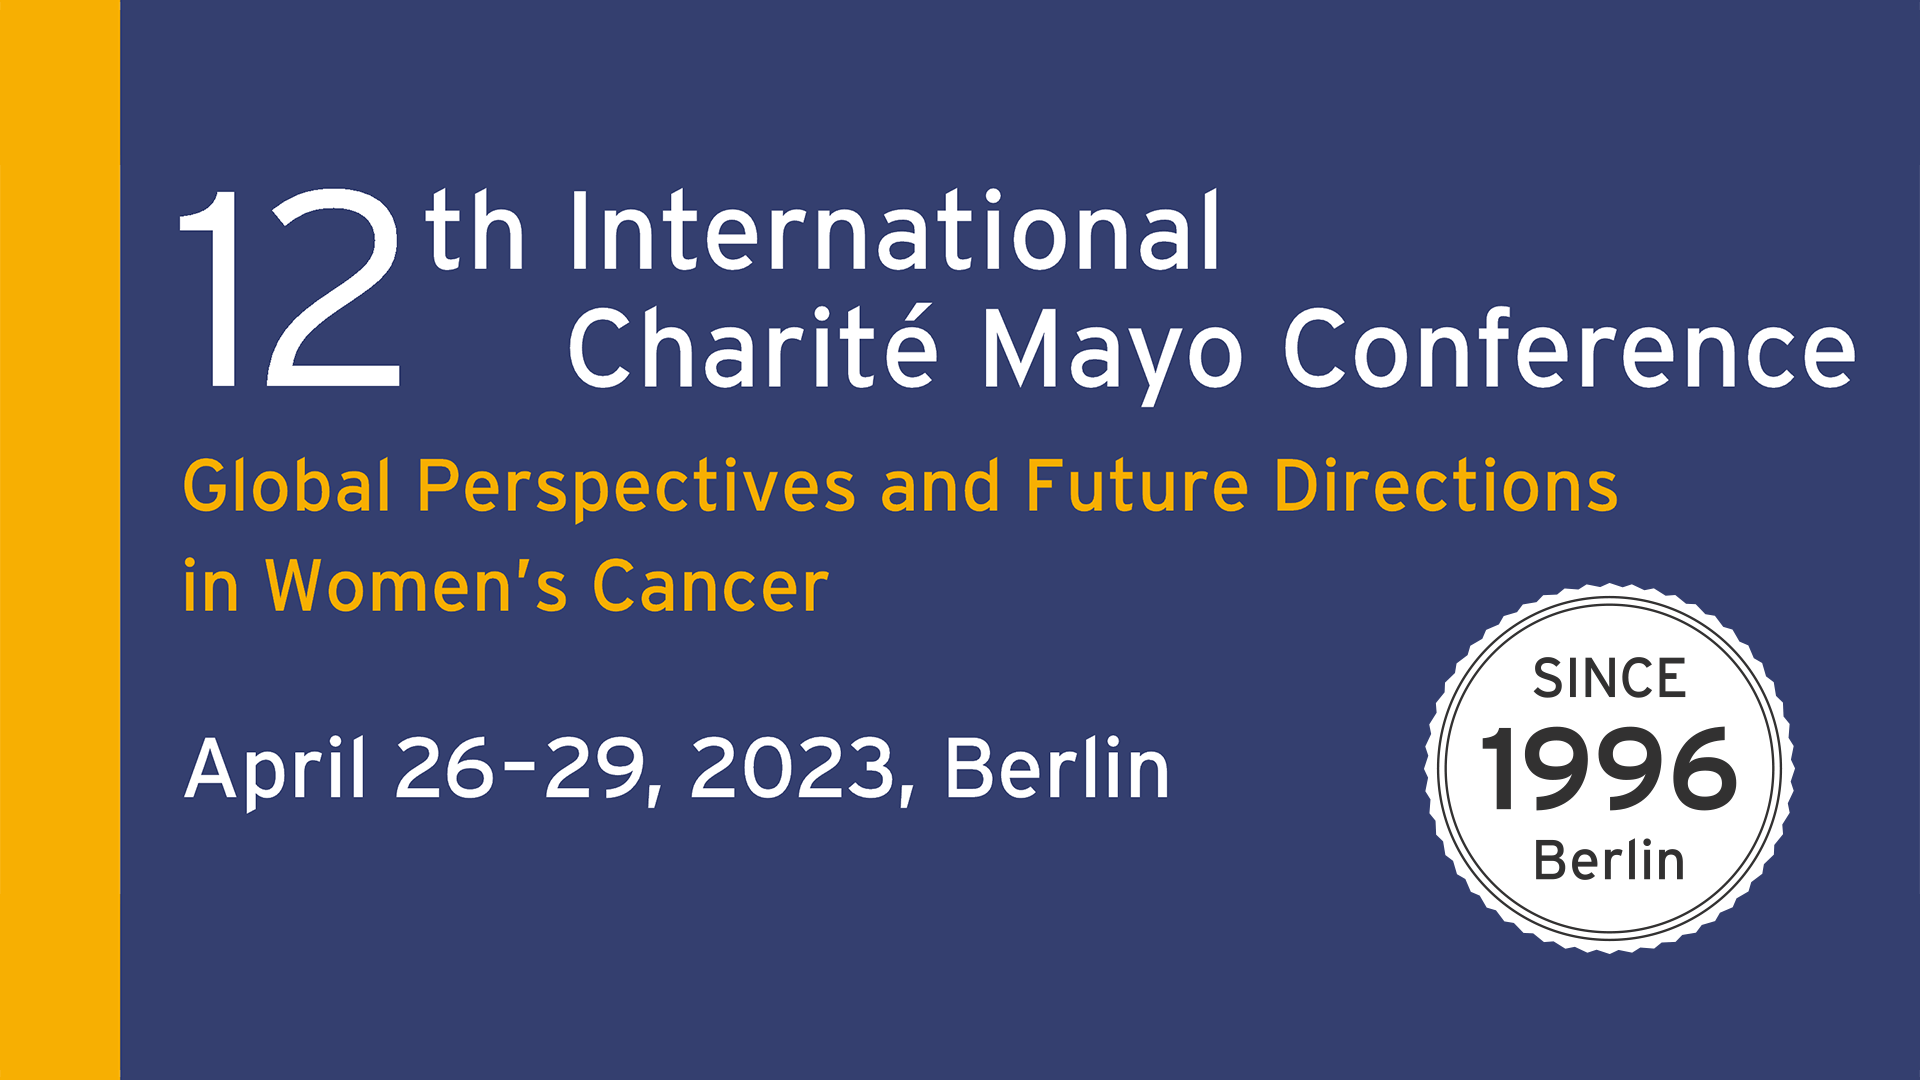 flyer 12th international charite mayo conference 1920x1080